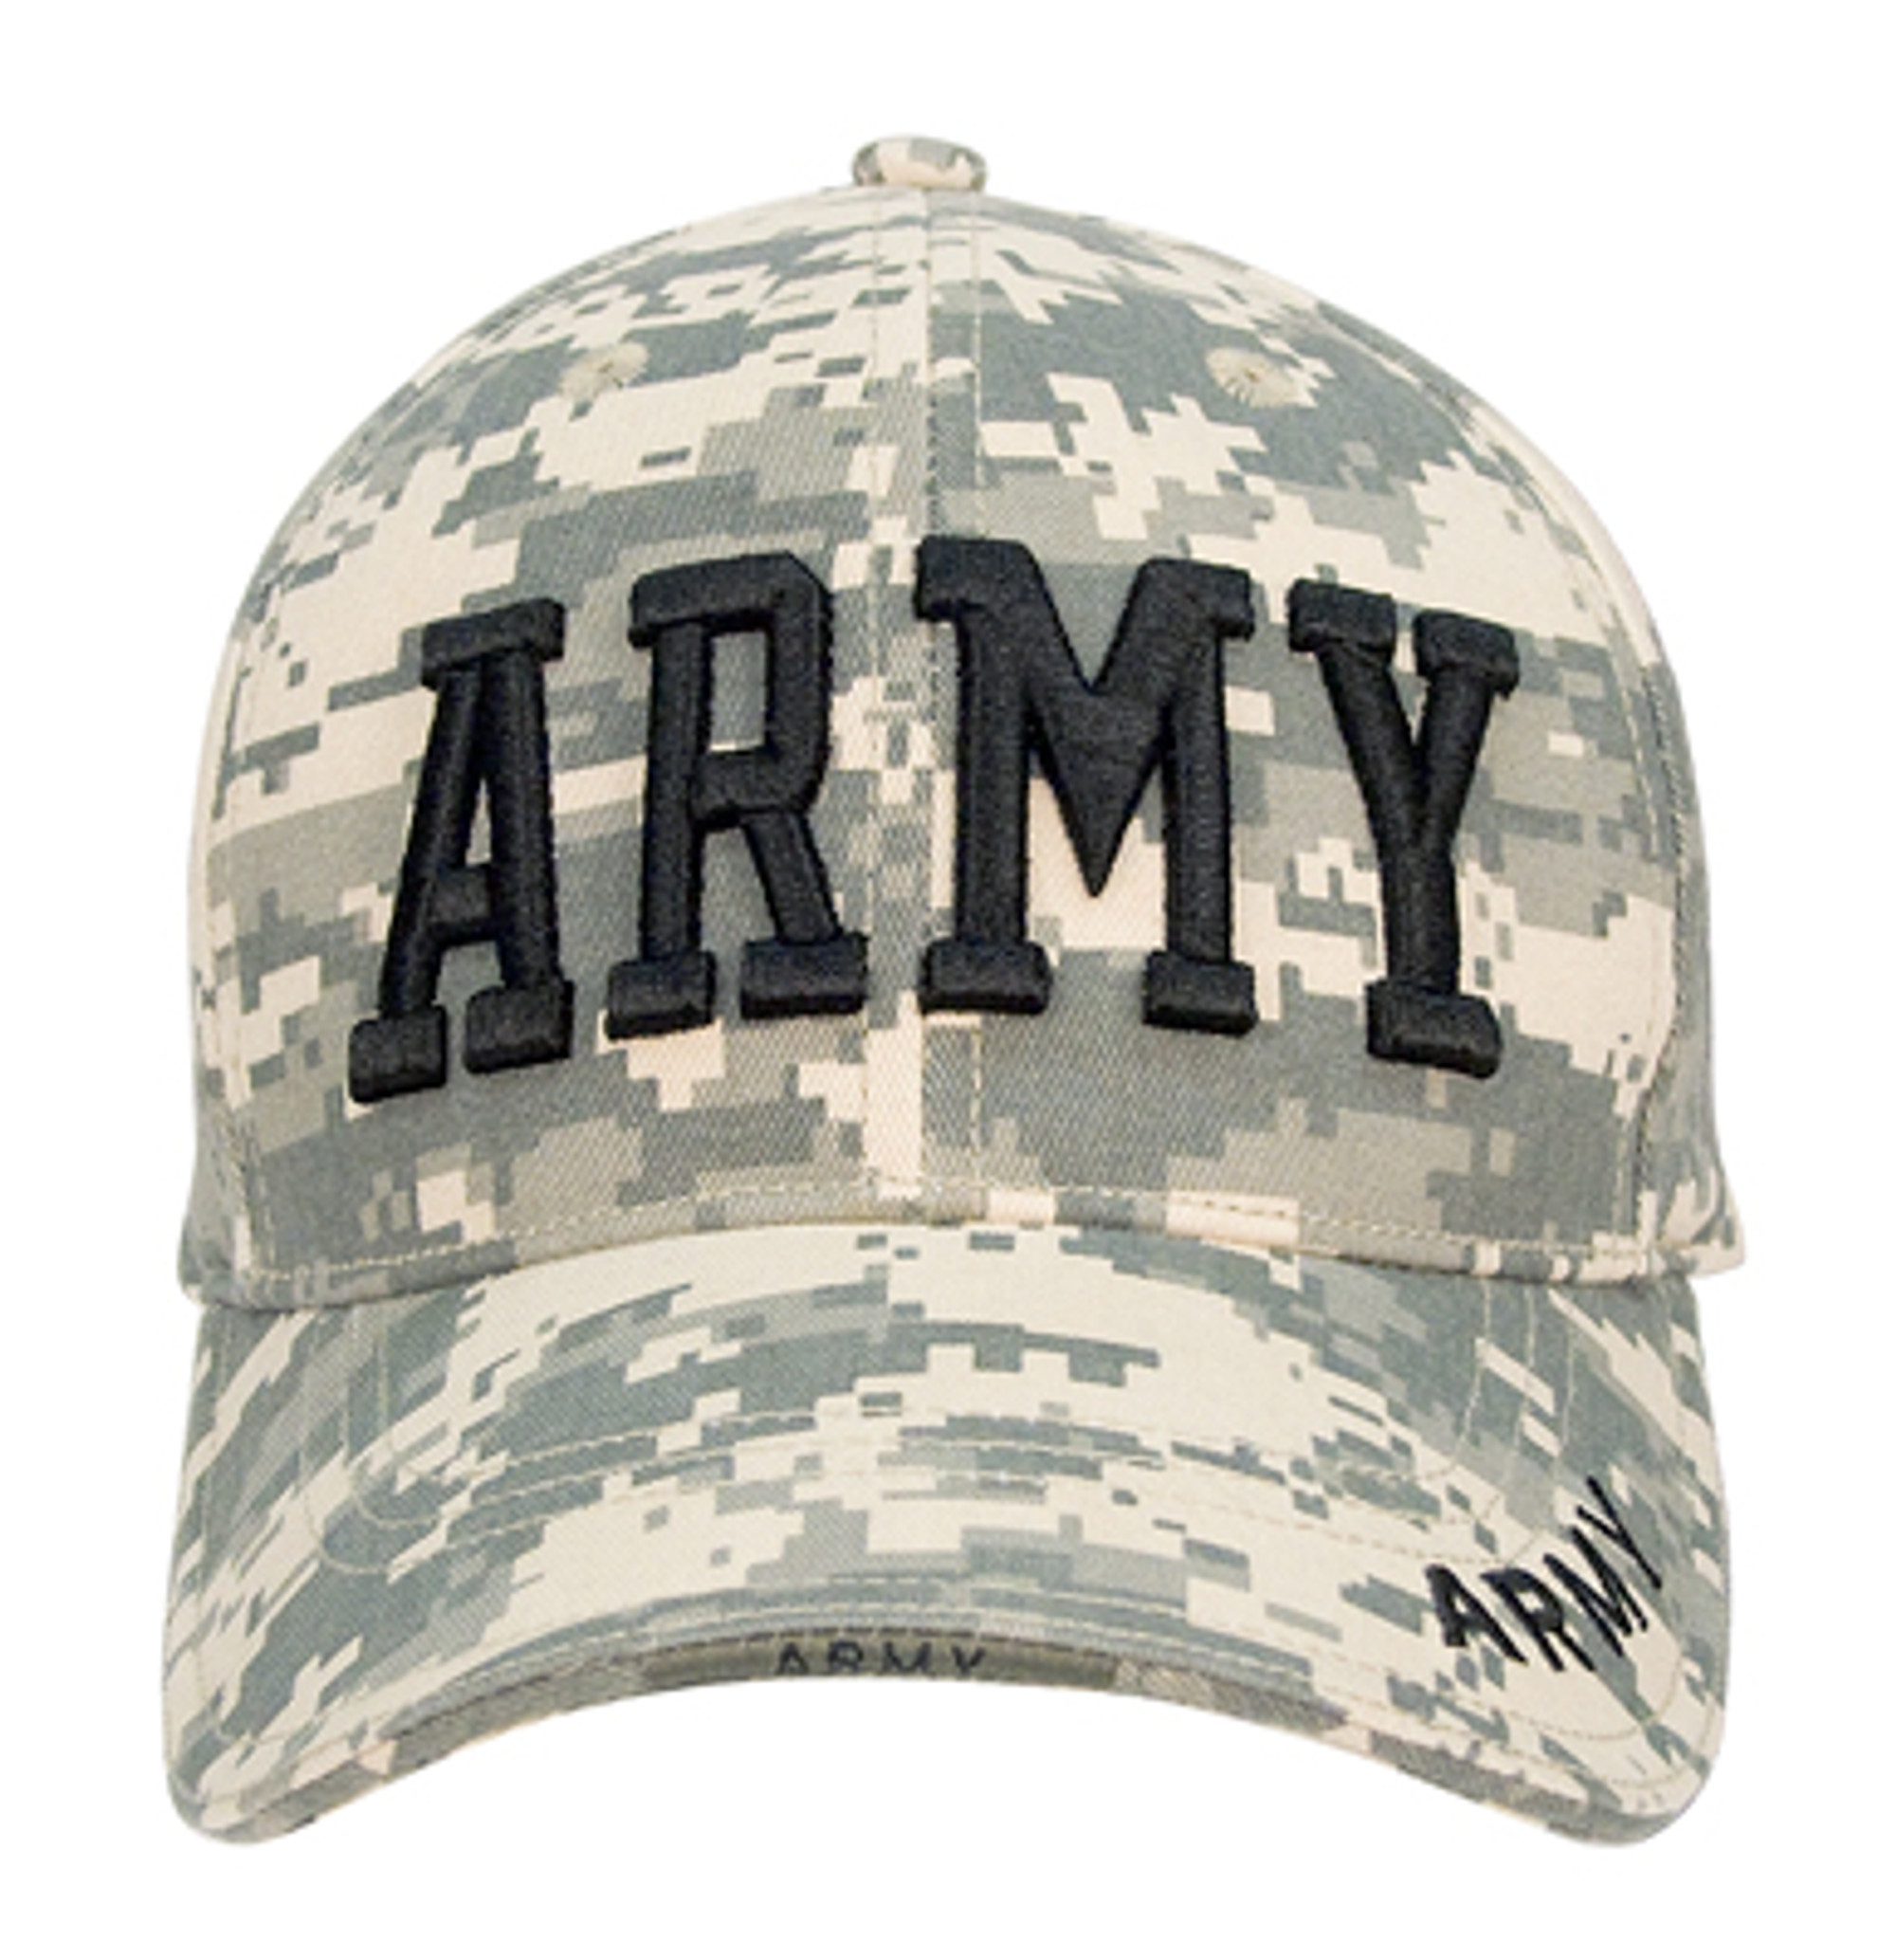 Rothco Deluxe Army Embroidered Low Profile Insignia Cap - ACU